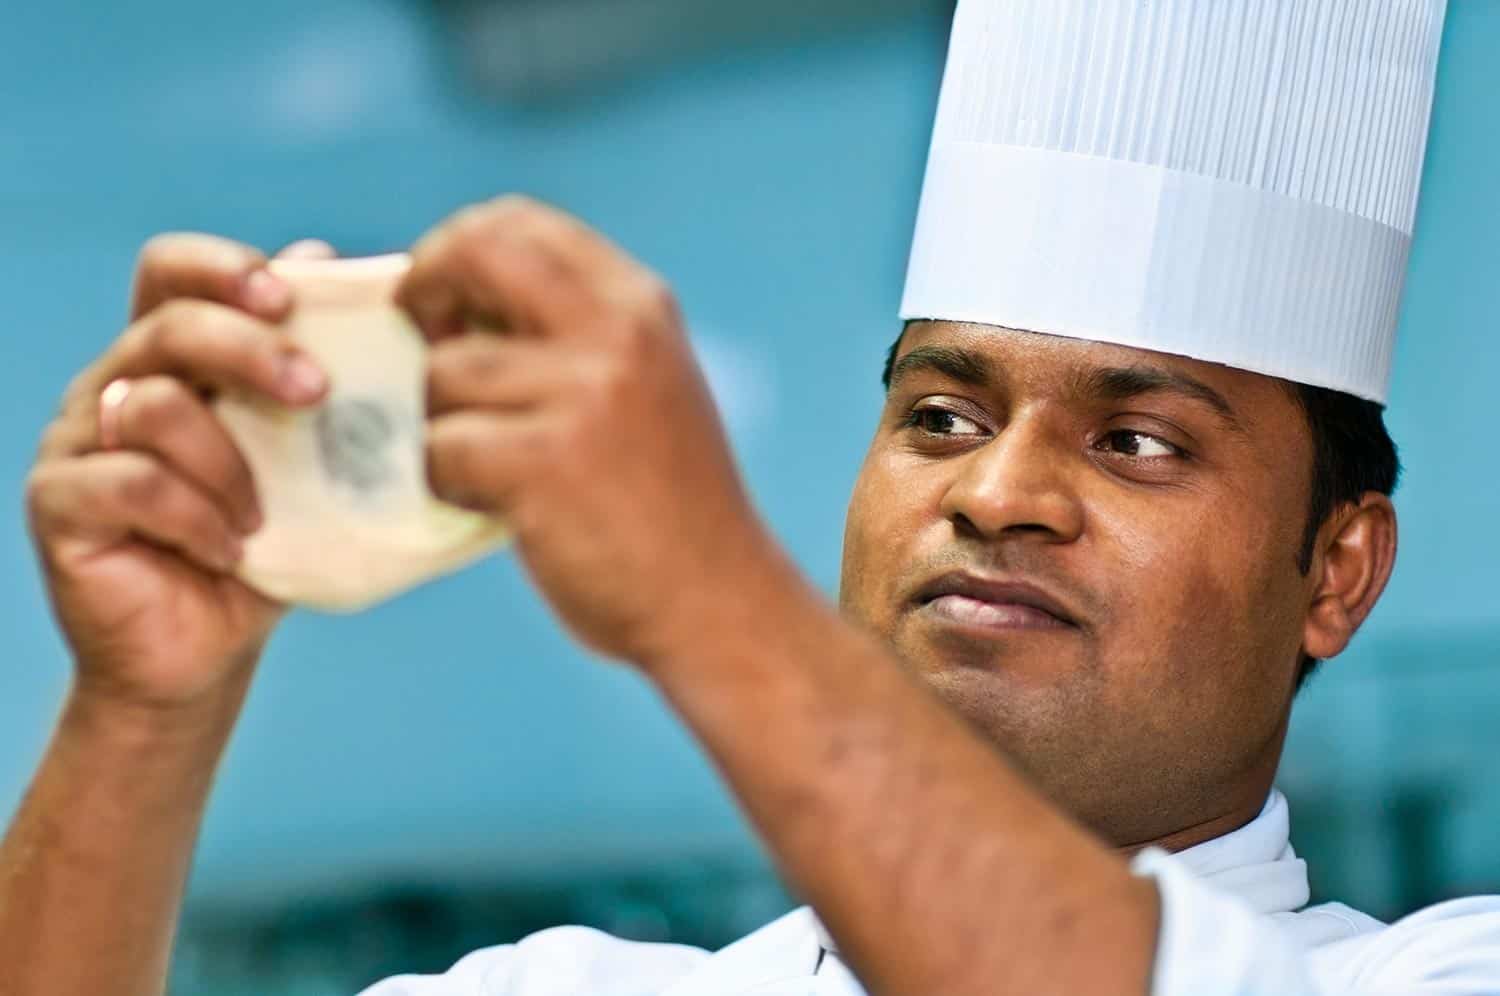 Indian chef checking the quality of dough